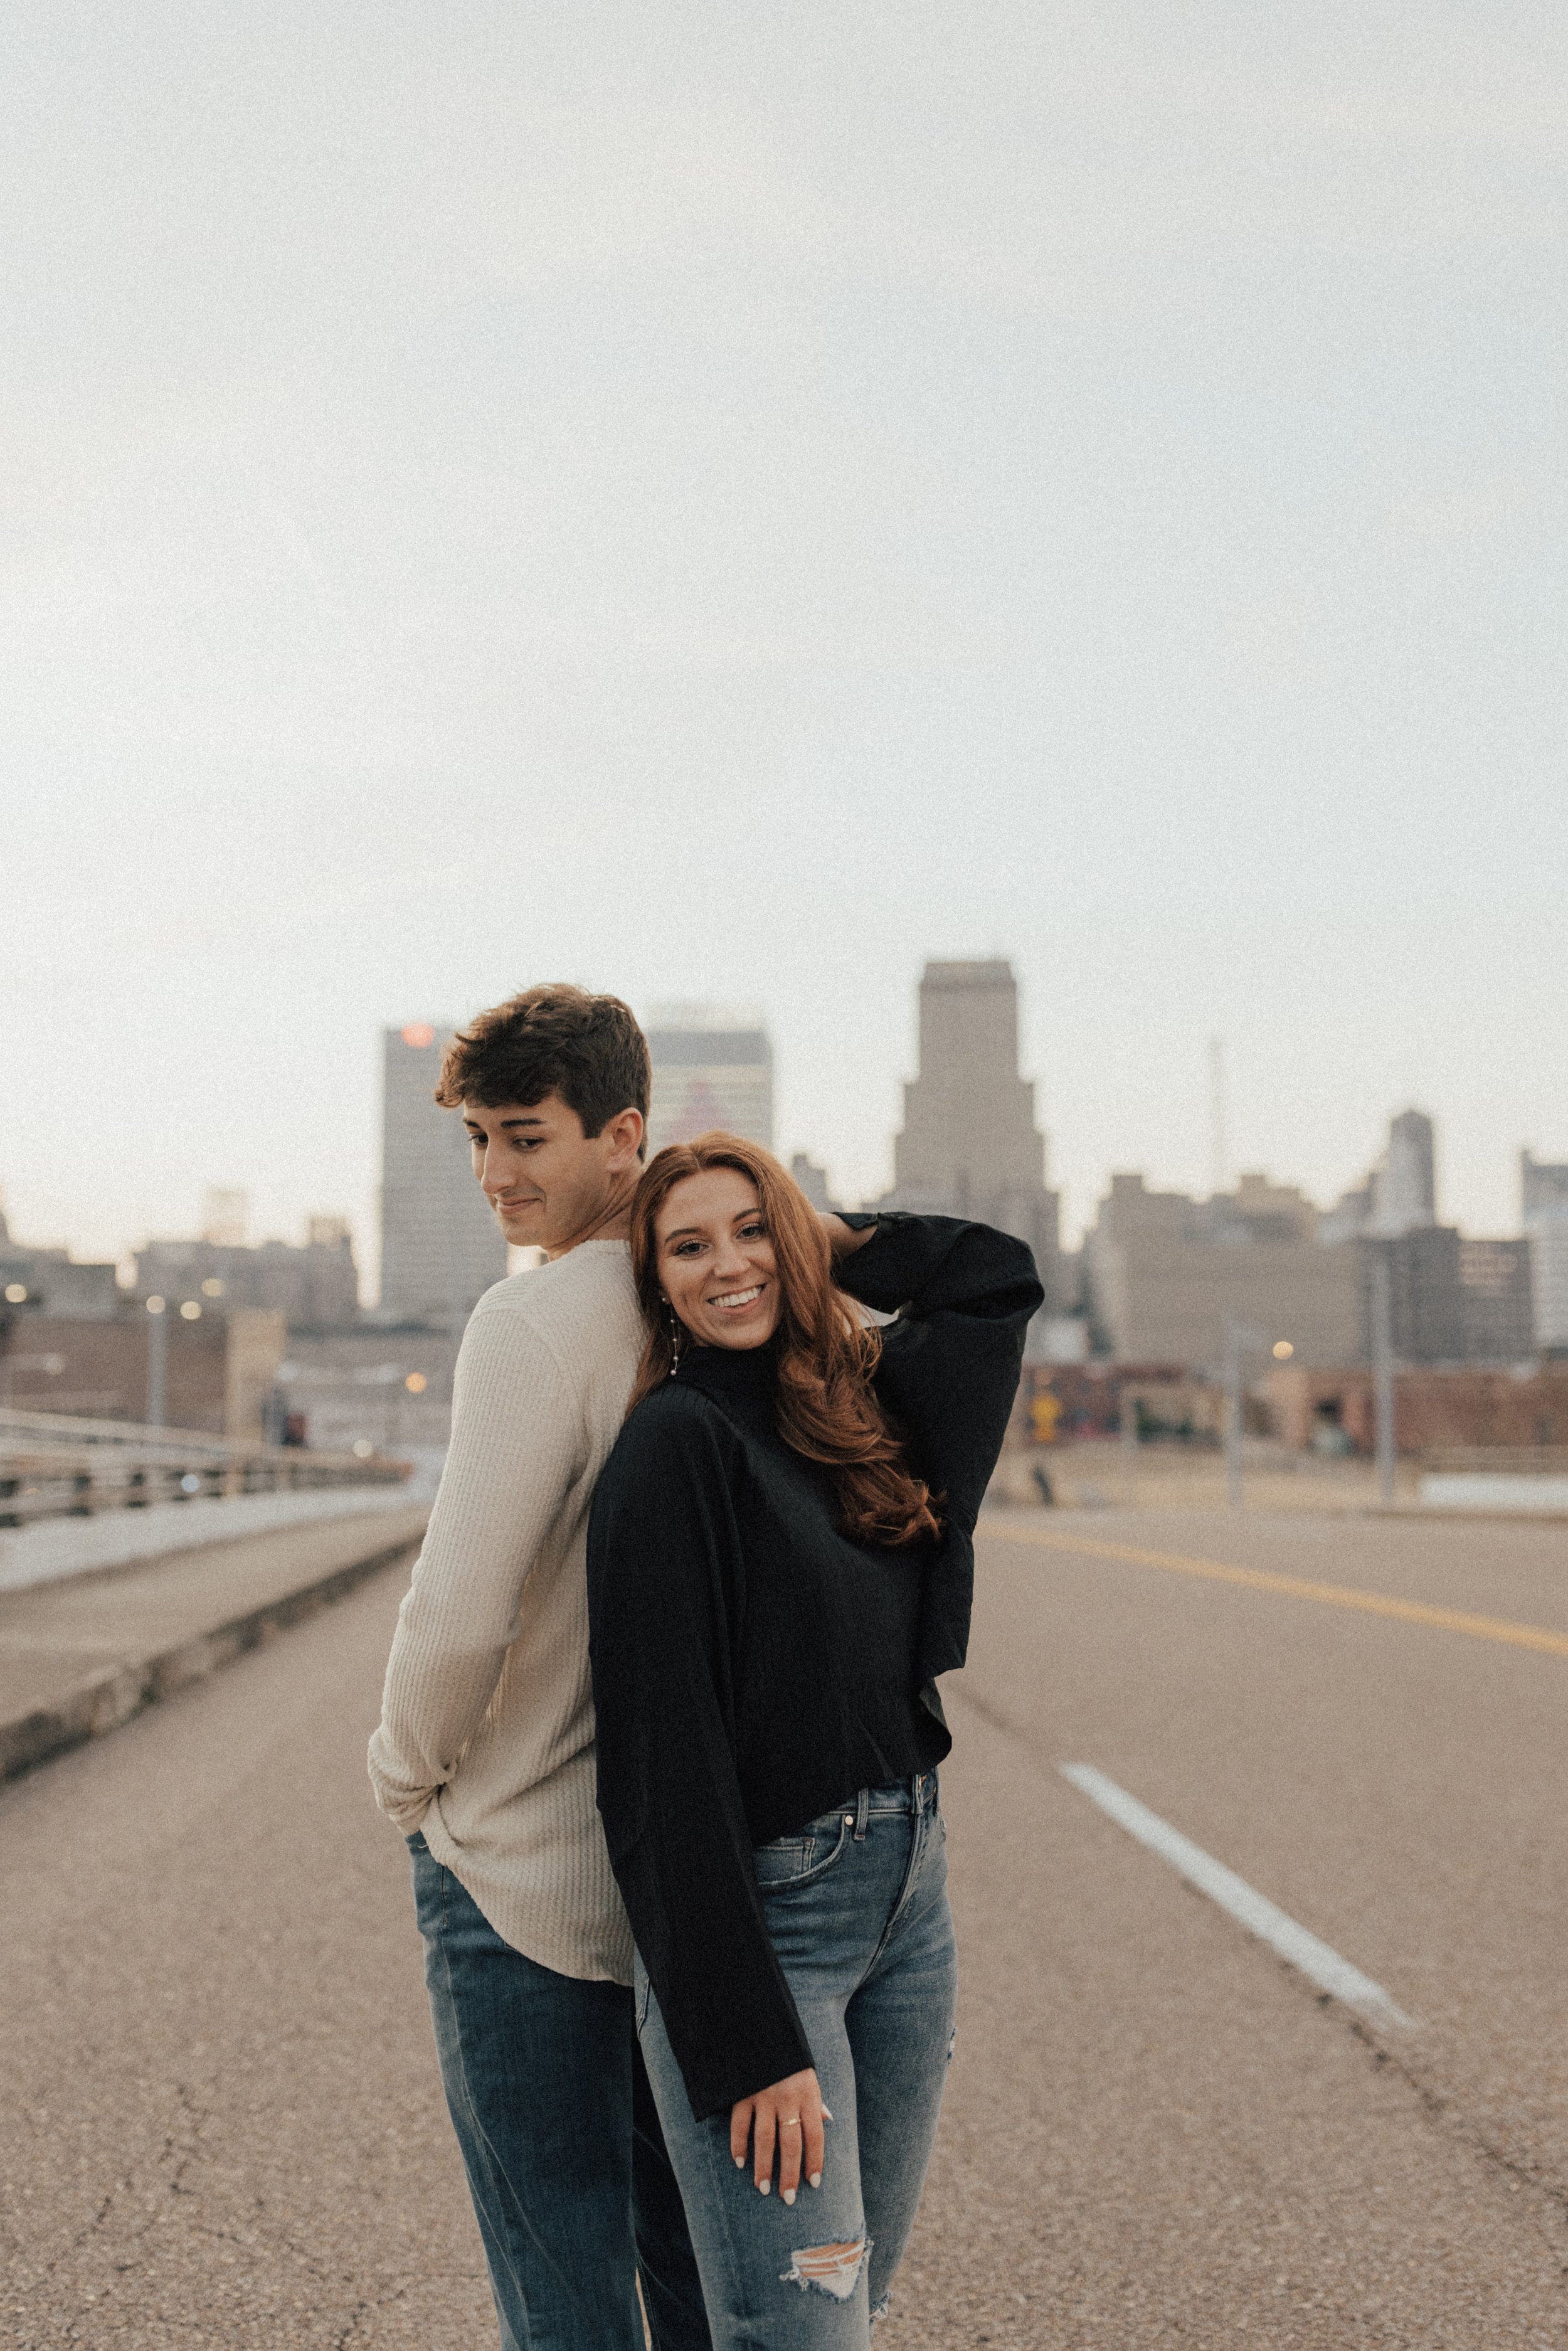 jill-and-jeffrey-winter-engagement-session-hotel-napoleon-courthouse-downtown-memphis-arkansas-tennessee-wedding-photographer-jo-darling-photography-132.jpg